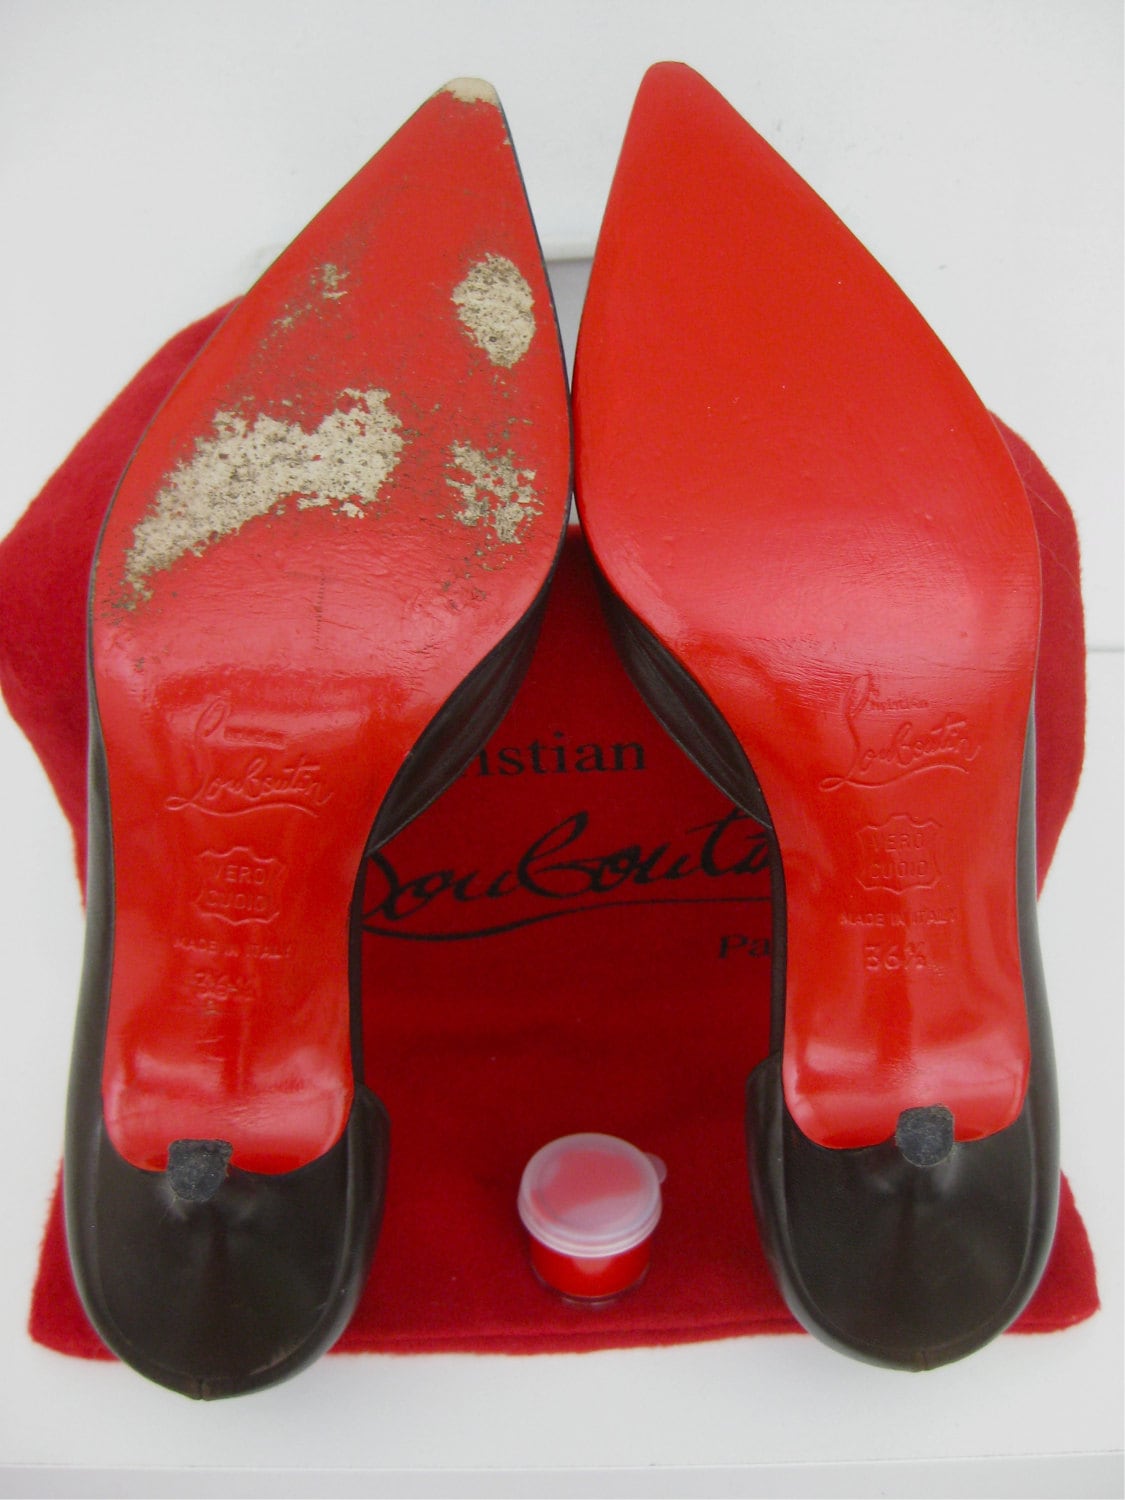 How Christian Louboutin's red soles paint the full picture of femininity